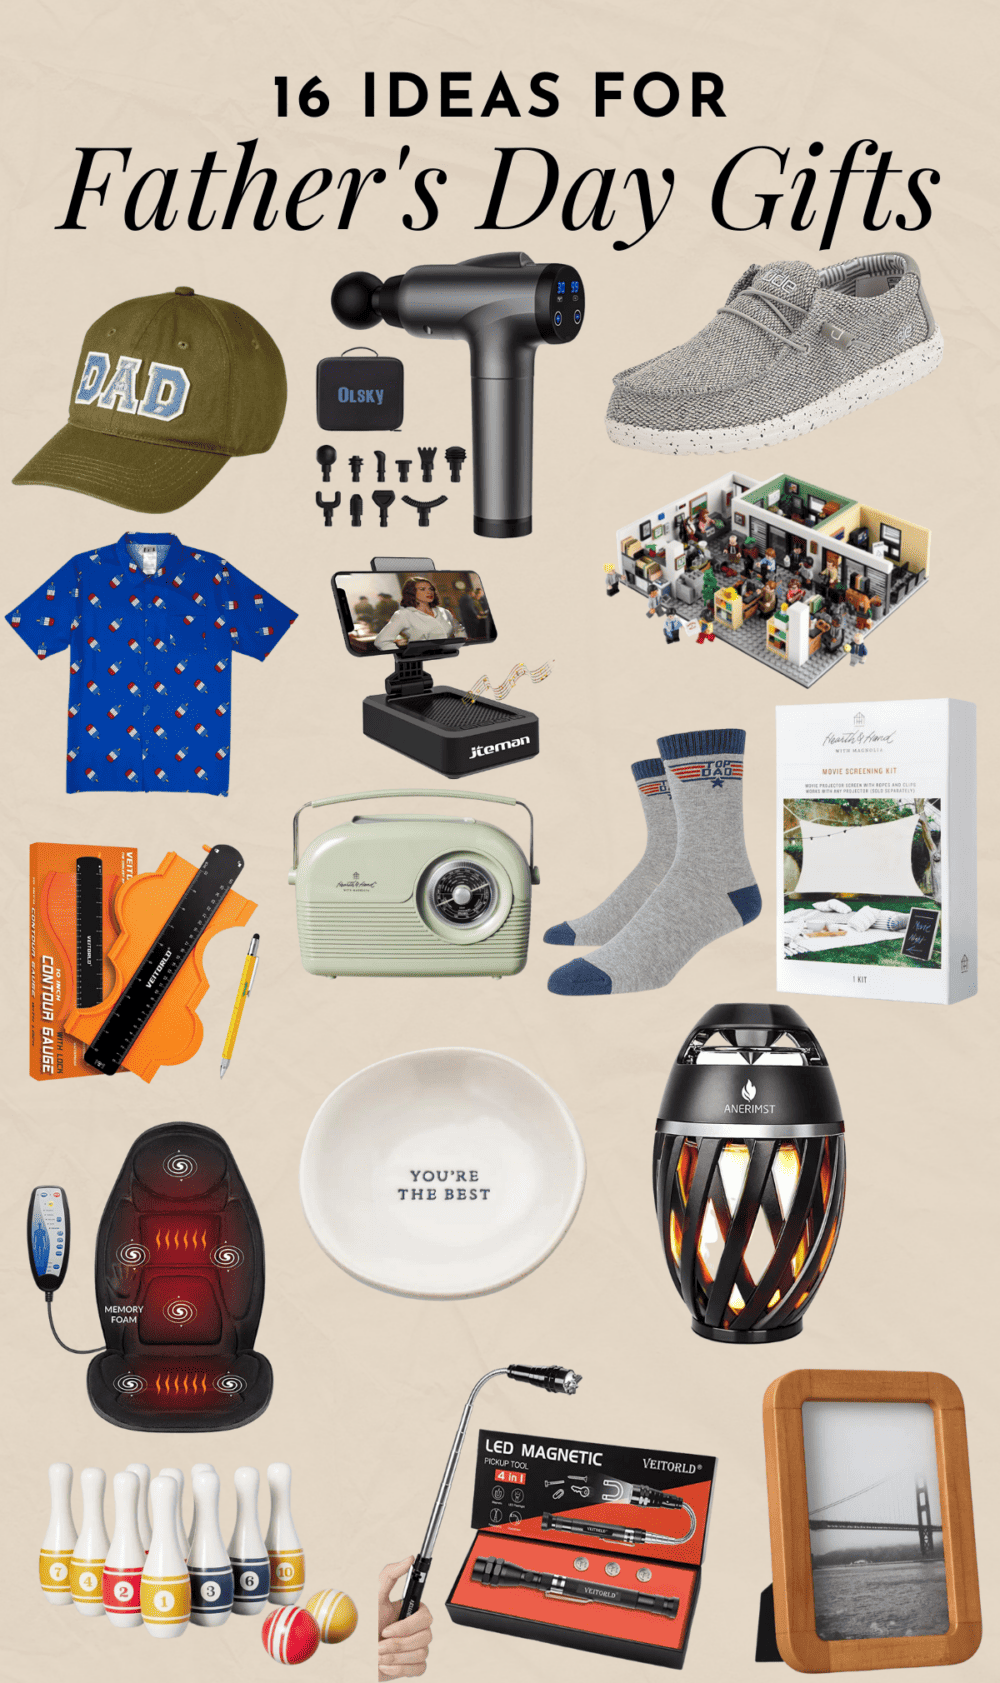 10 Father's Day Gift Ideas for the Healthy Dad - Loveleaf Co.